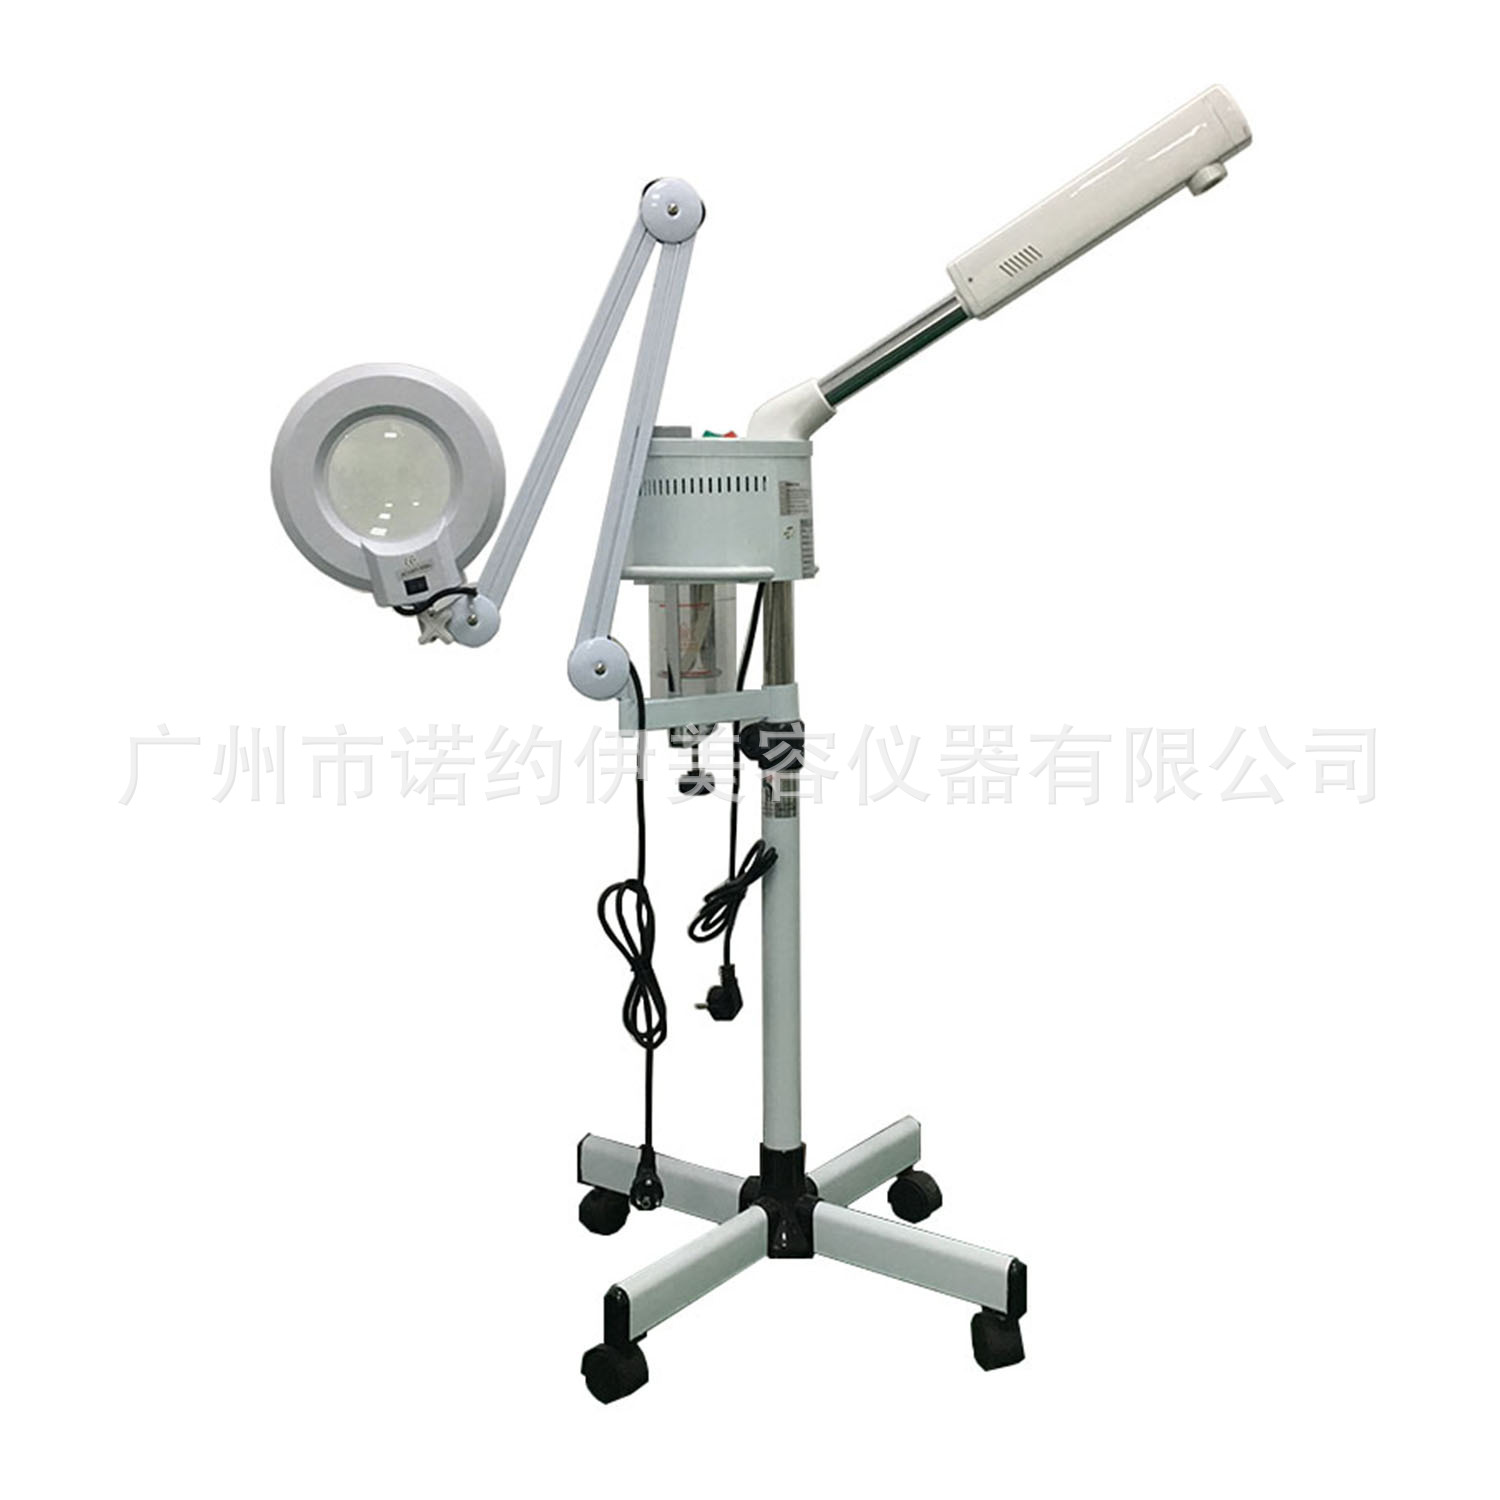 2 in 1 LED Cold light magnifier Hot spraying sprayer Beauty salon supplies